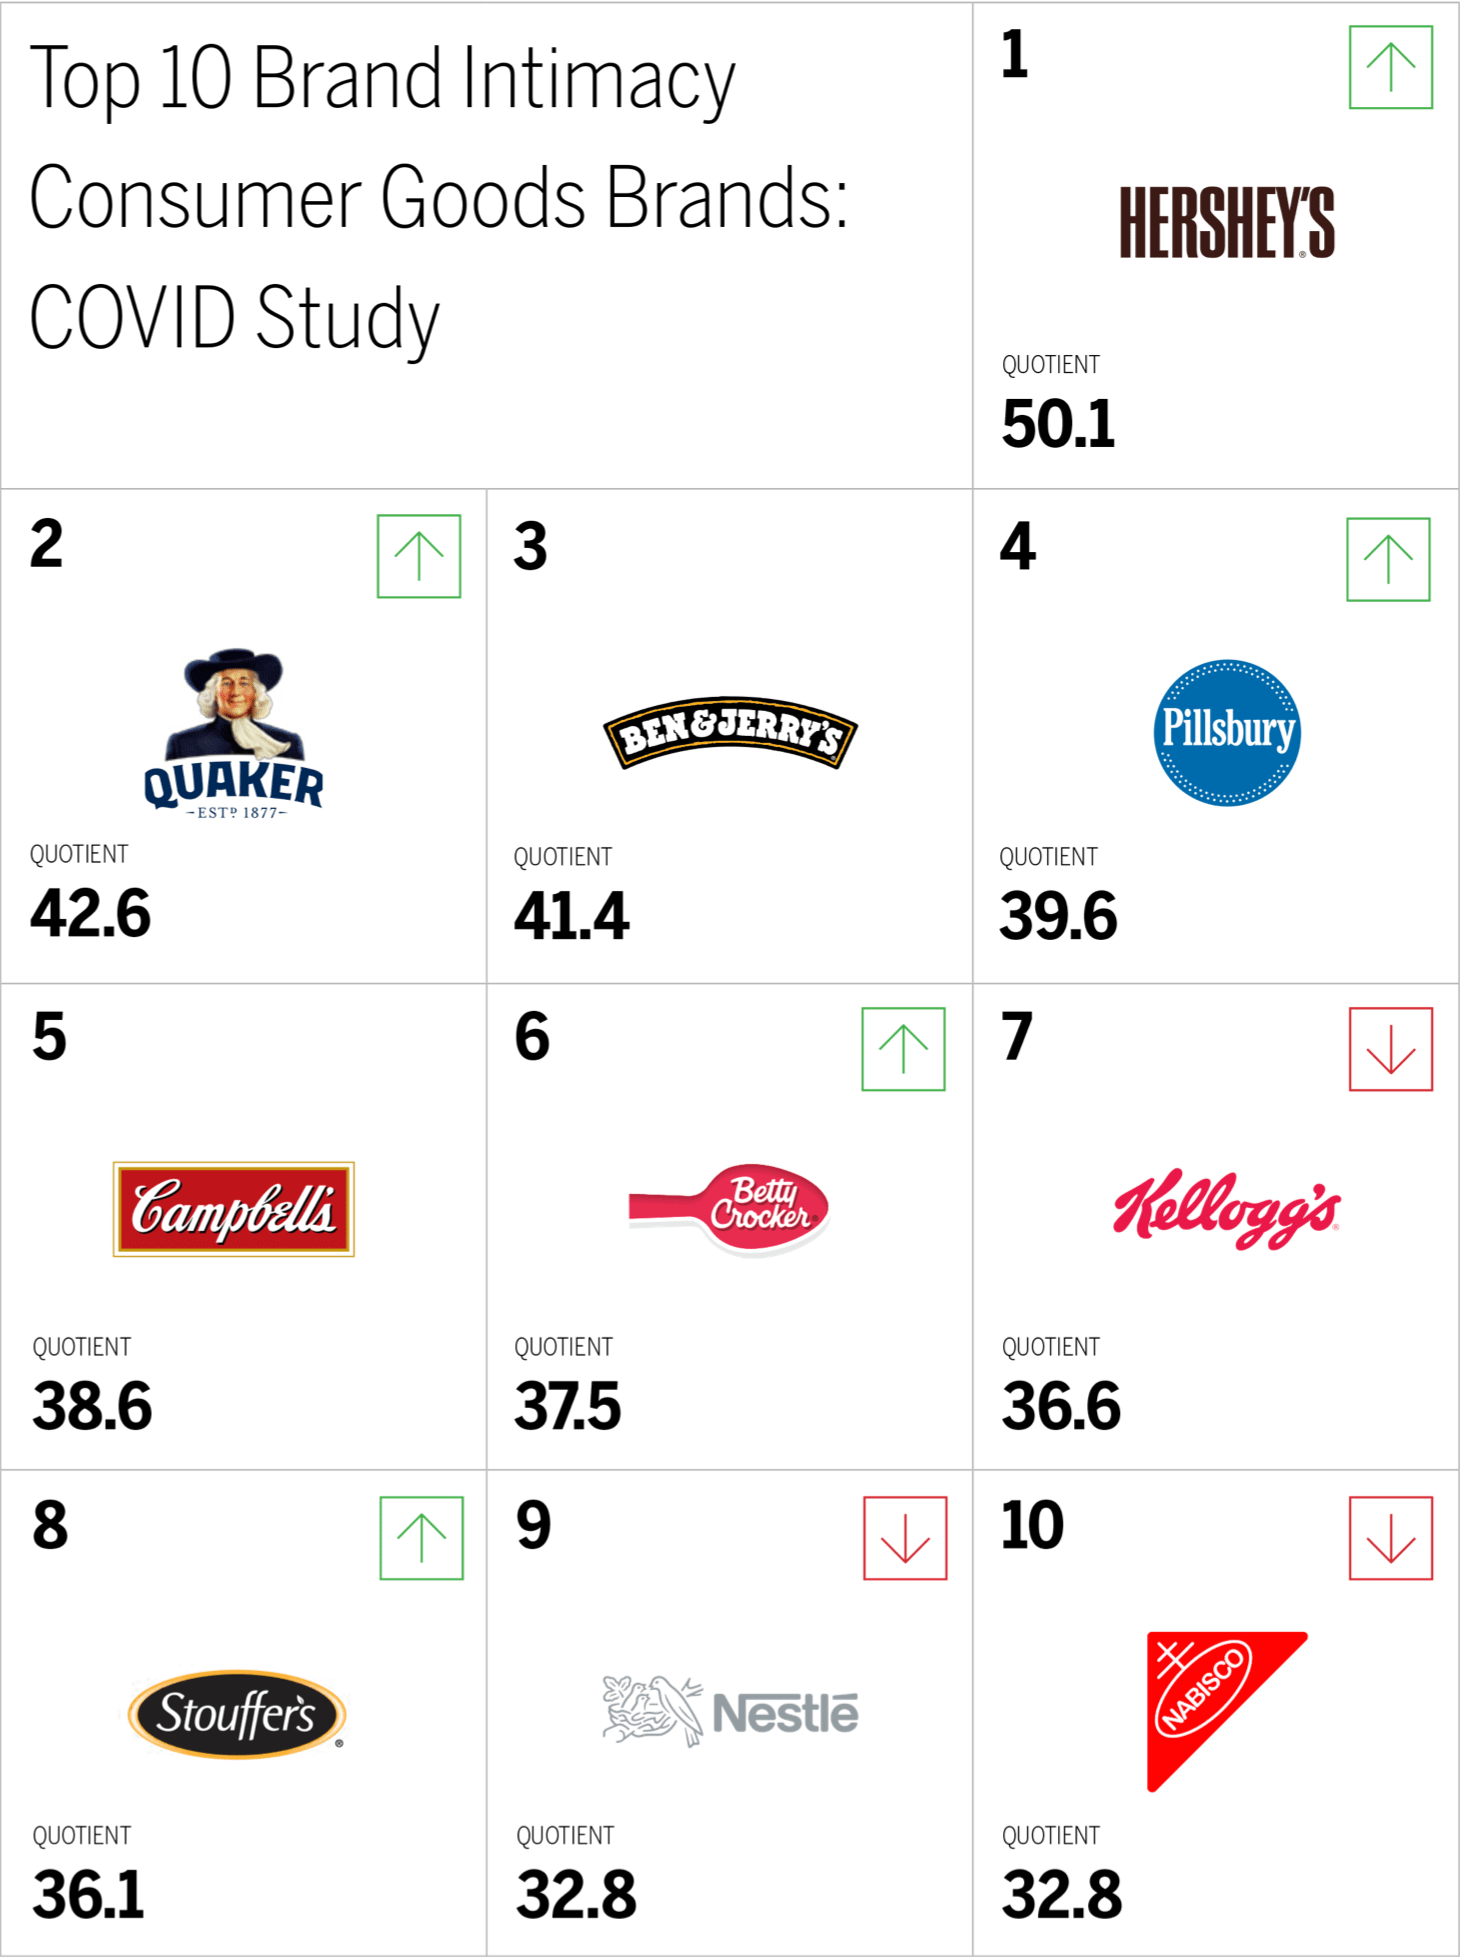 Top 10 Brand Intimacy Consumer Goods Brands: COVID Study Chart